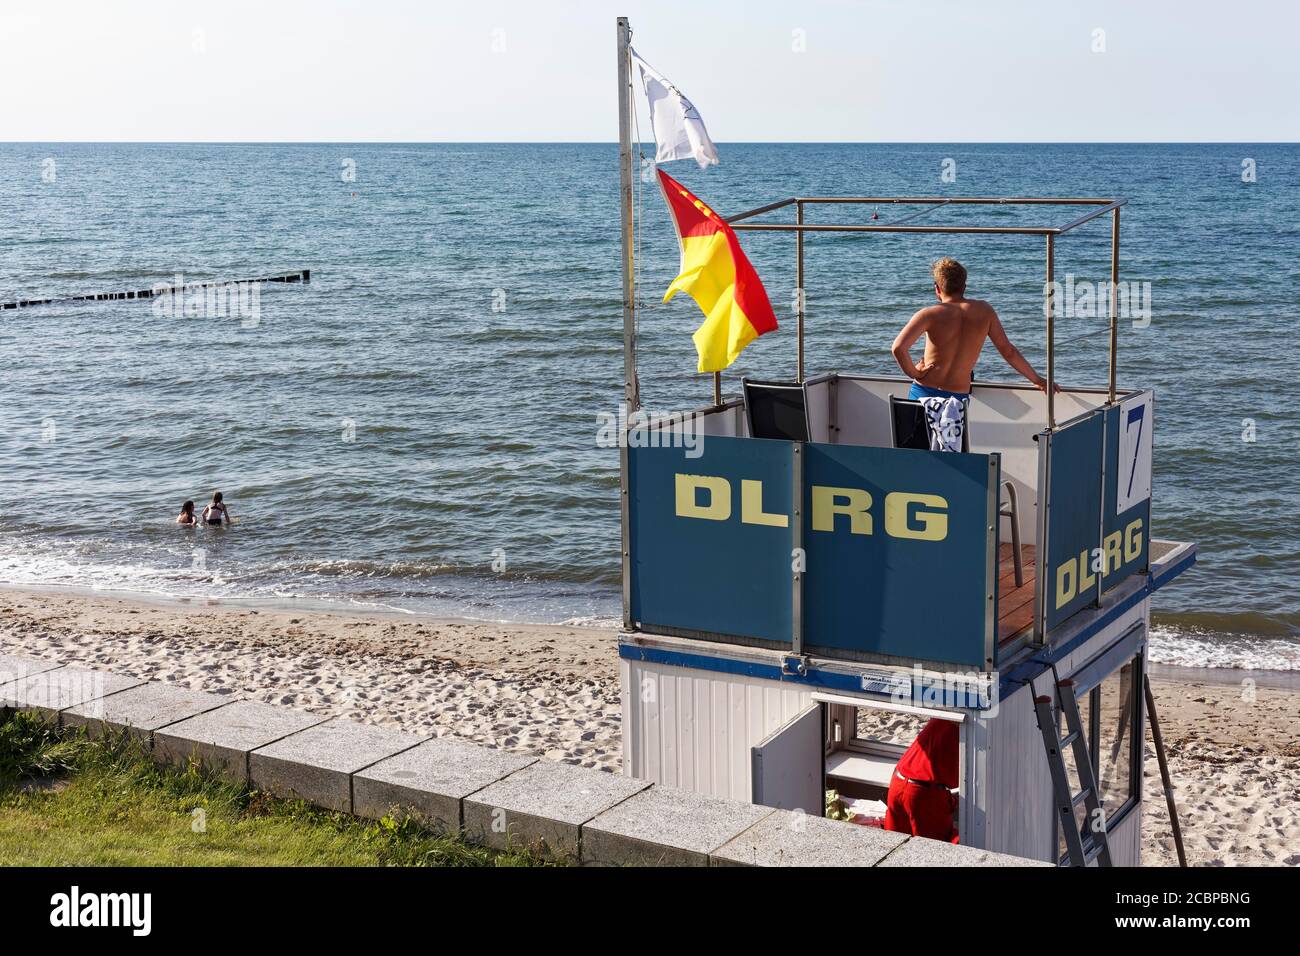 Beach guard observes two bathers, DLRG tower at the Baltic Sea, Kuehlungsborn, Mecklenburg-Western Pomerania, Germany Stock Photo